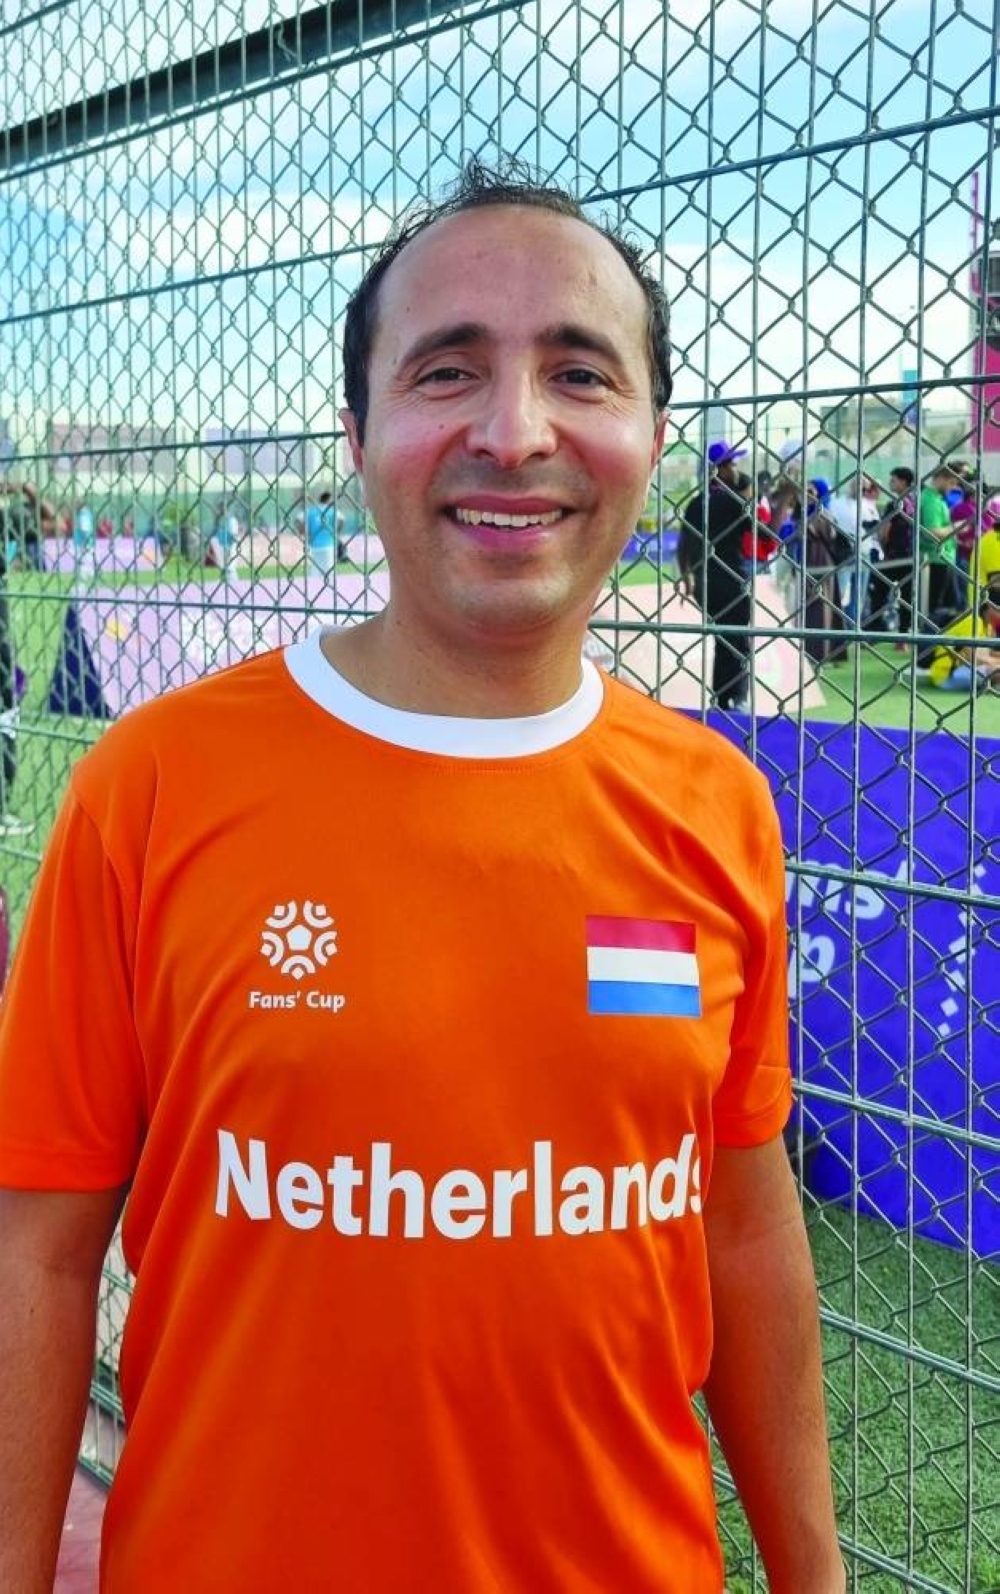 Faisal from the Netherlands is taking part in the FIFA Fans Cup. PICTURE: Joey Aguilar